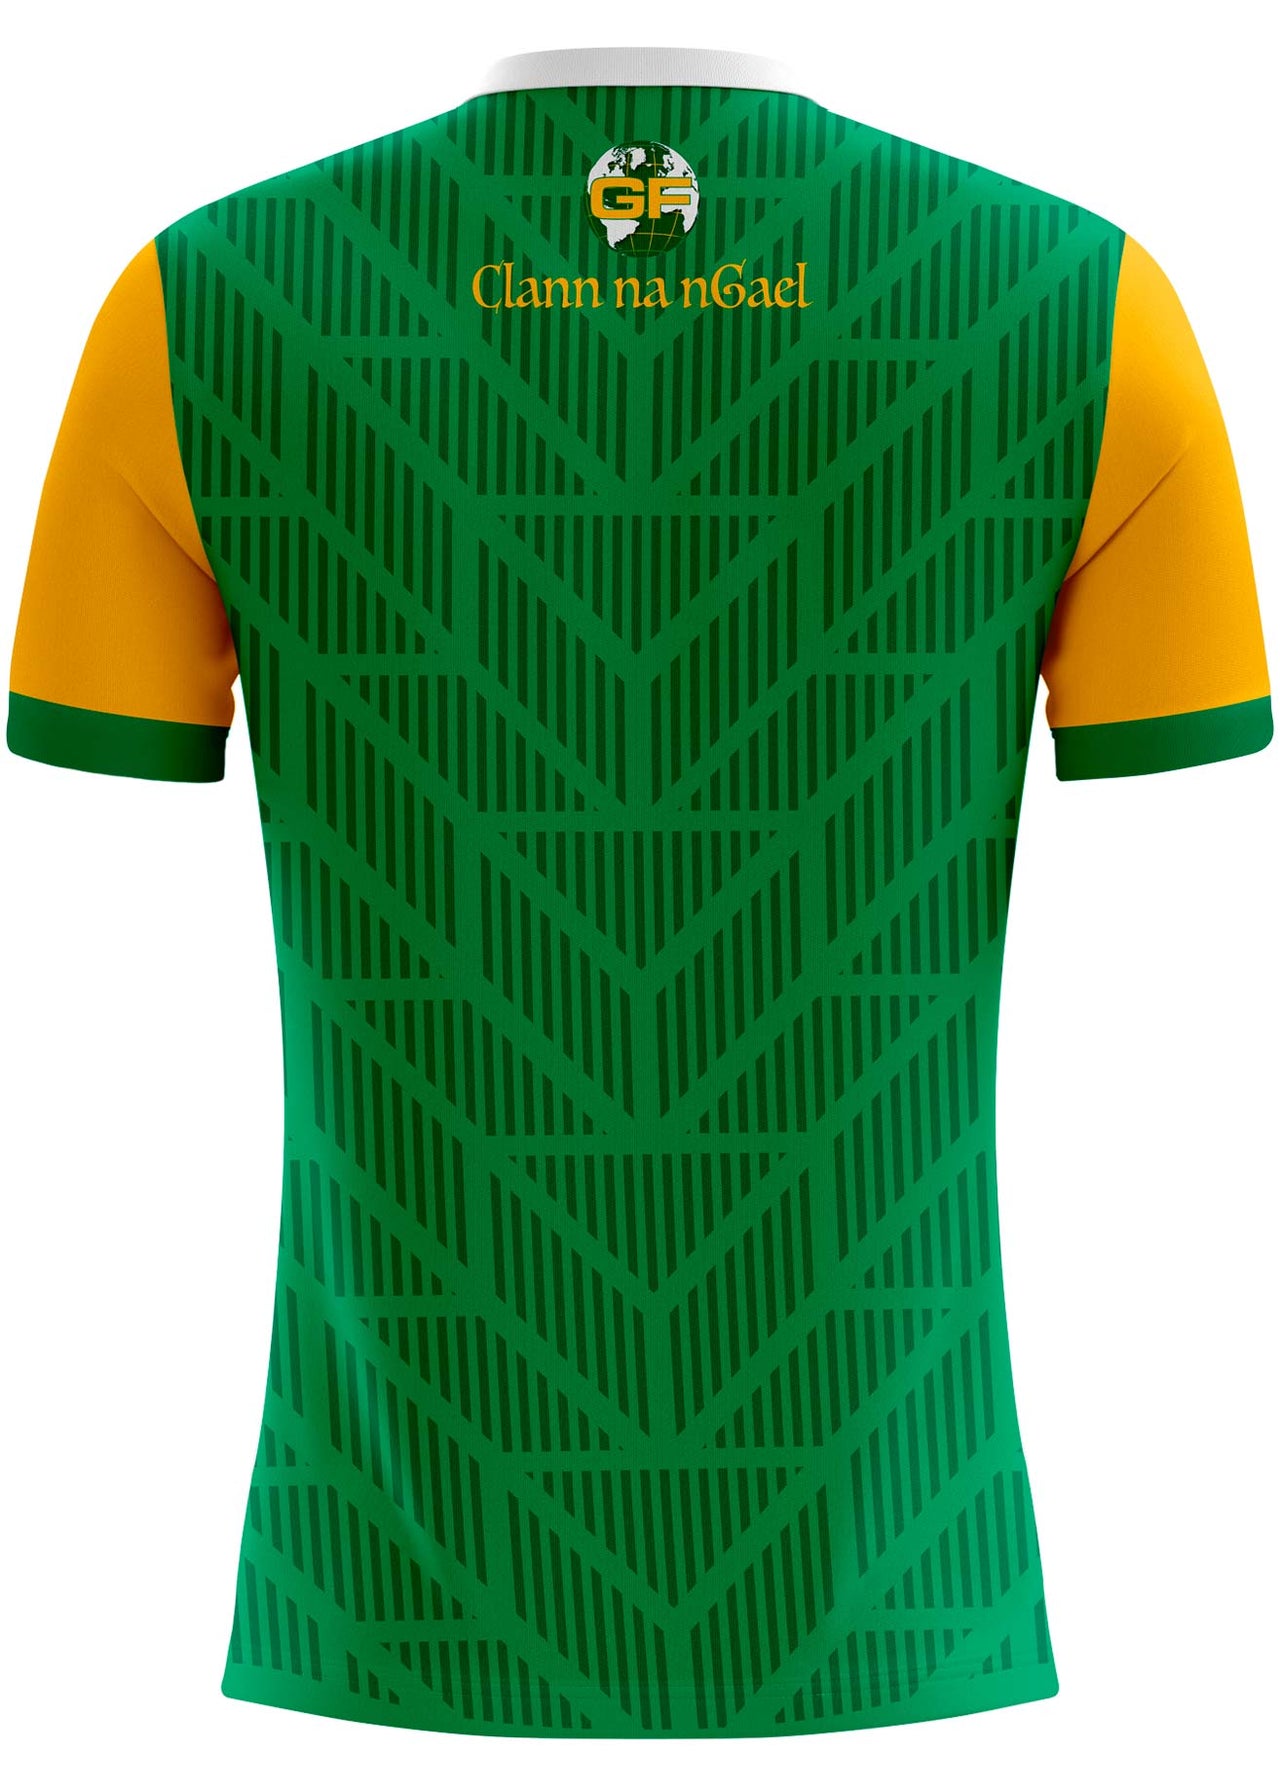 Clann na nGael Club Jersey Player Fit Adult